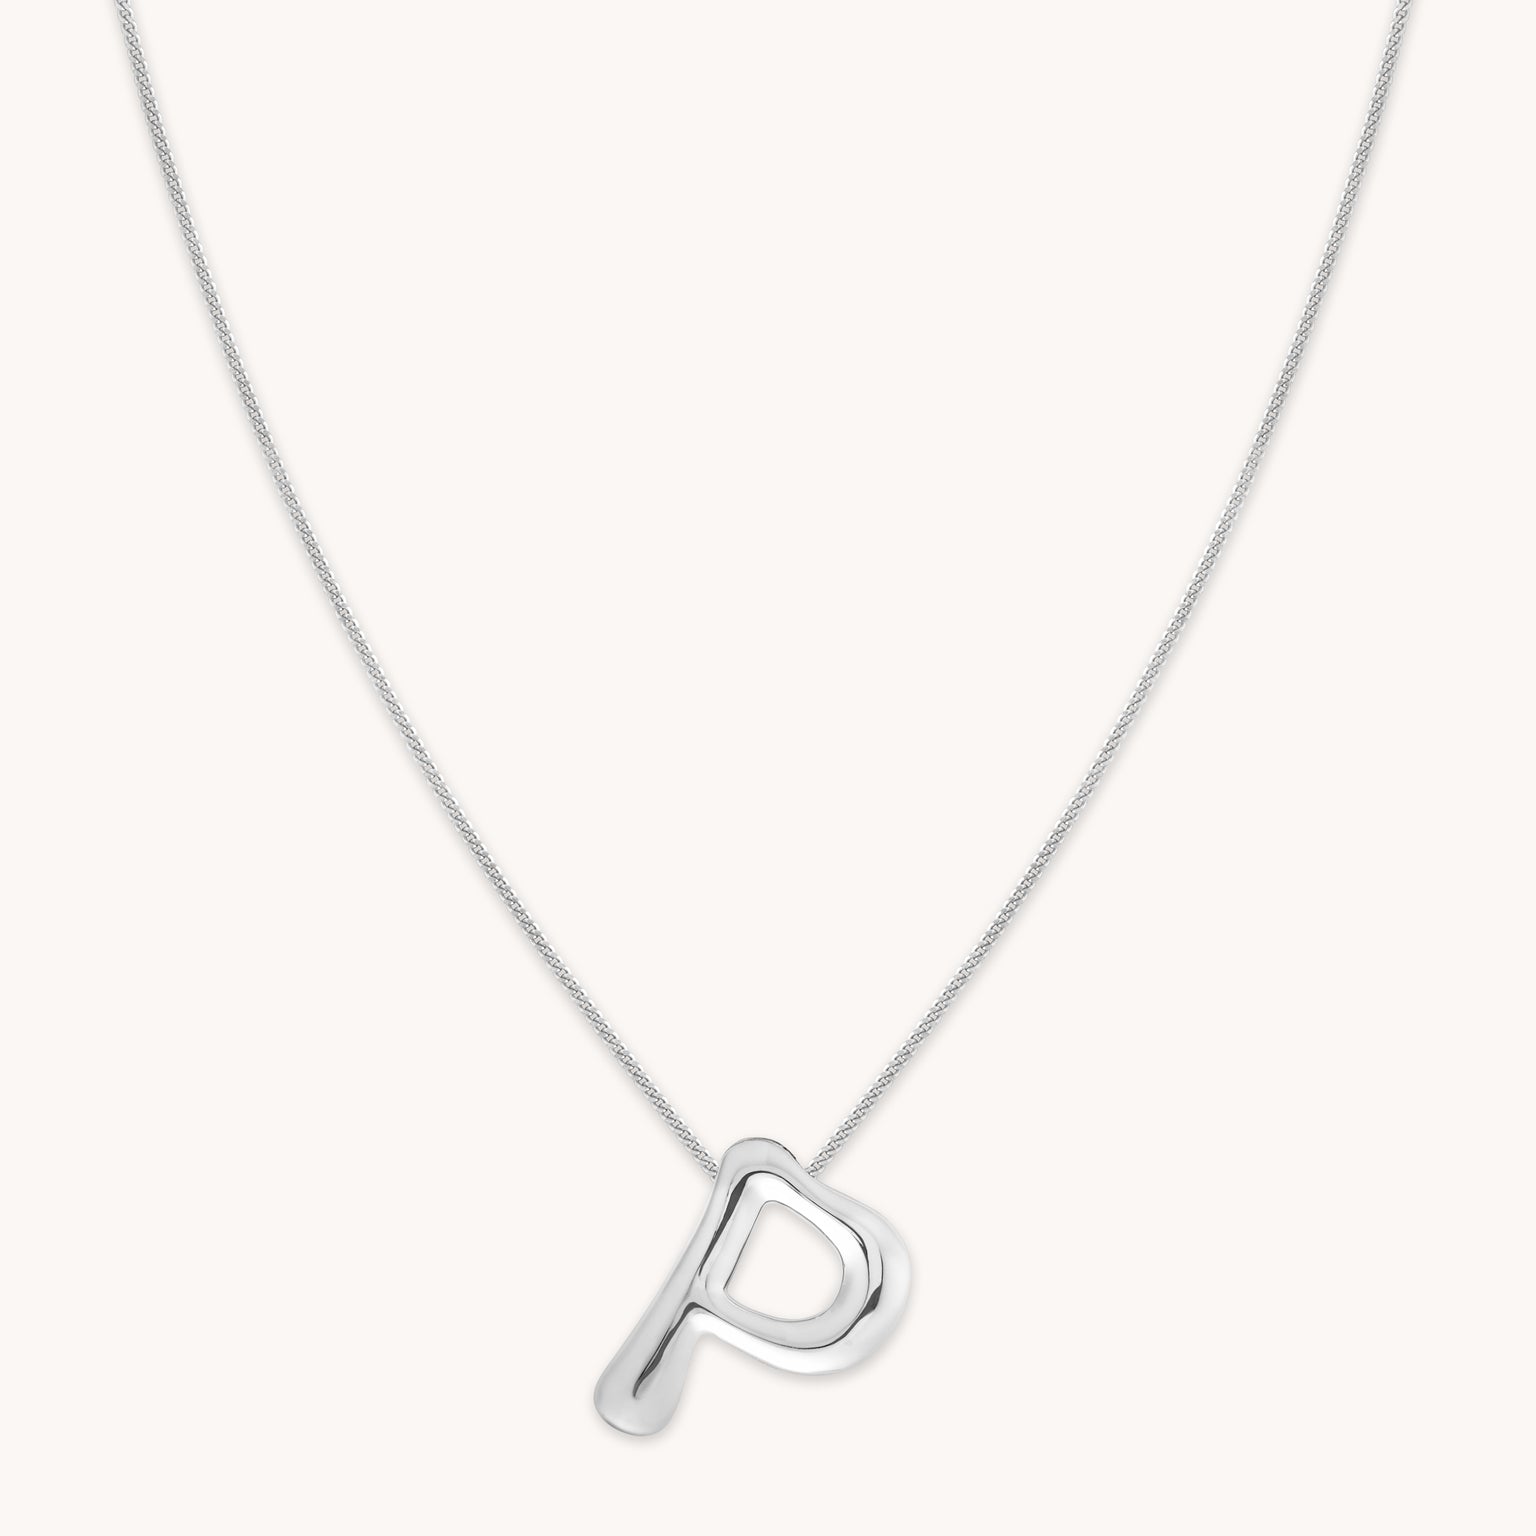 P Initial Bold Pendant Necklace in Silver